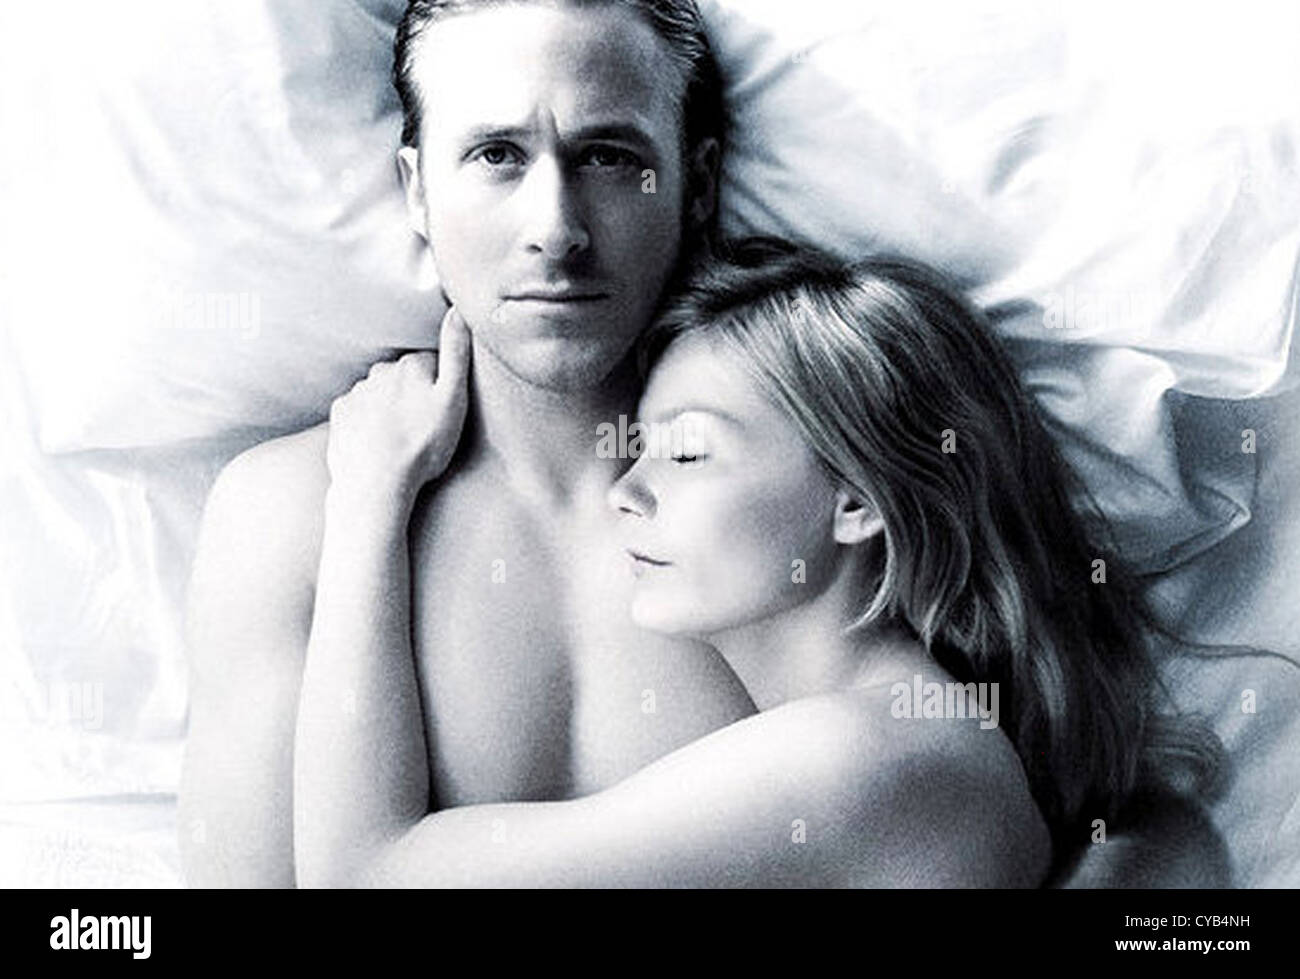 ALL GOOD THINGS 2010 Magnolia Pictures film with Kirsten Dunst and Ryan Gosling Stock Photo